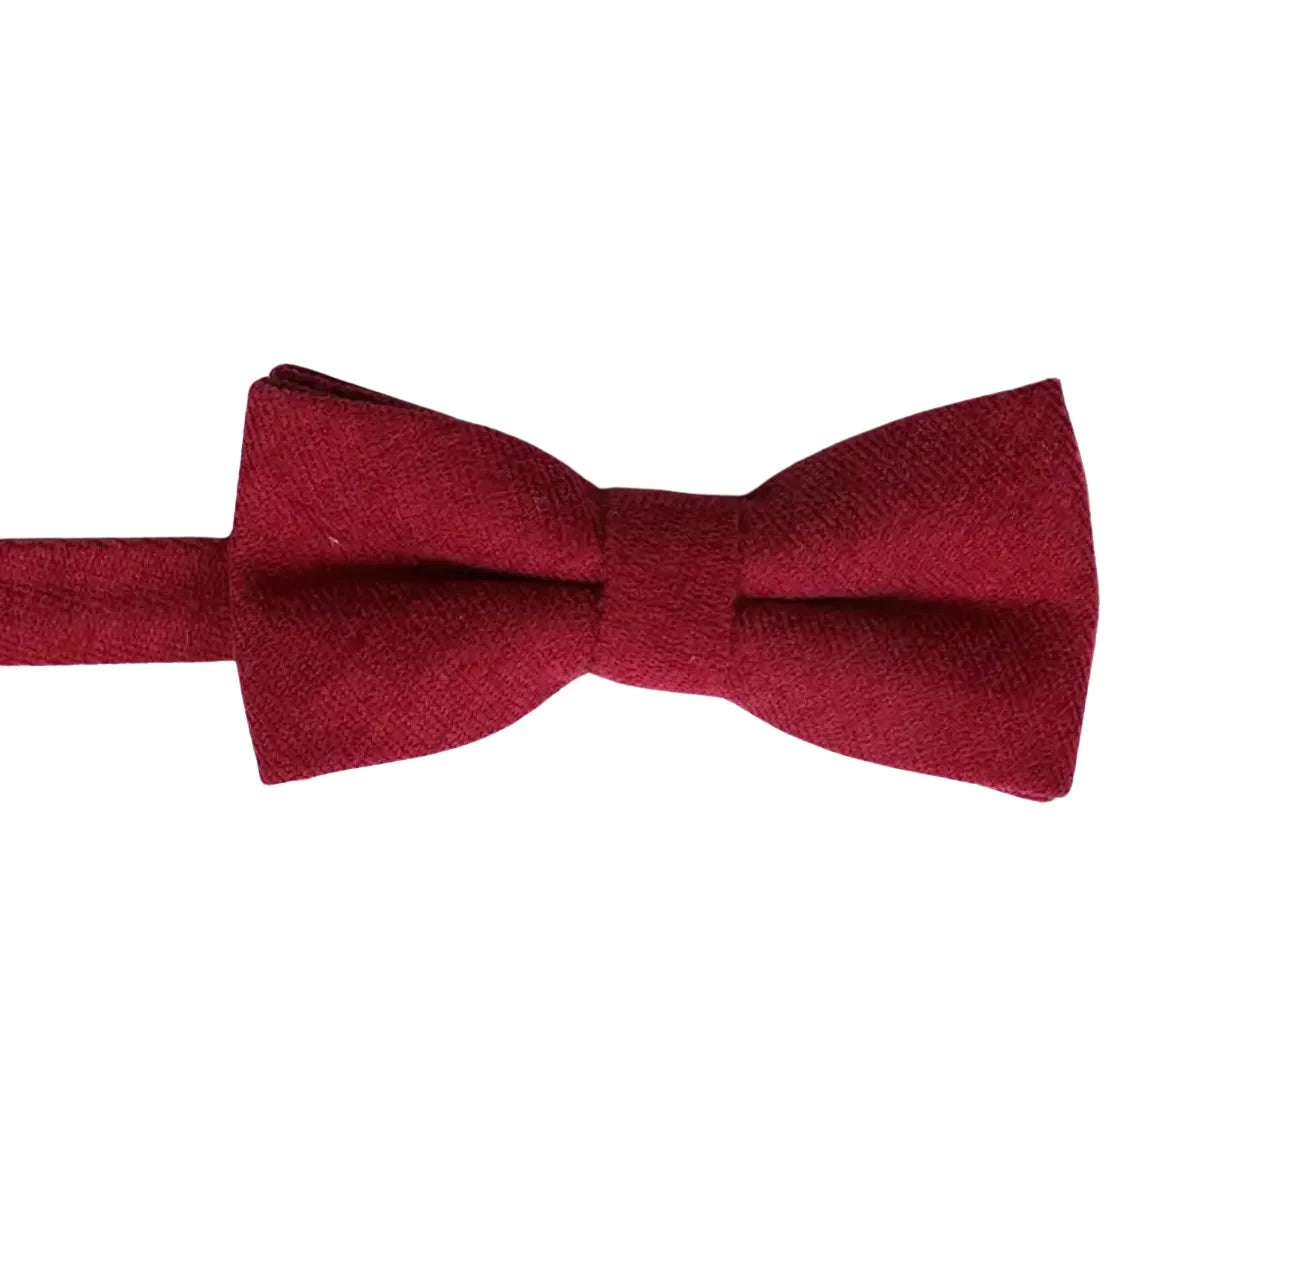 Red Bow Tie for Kids and baby’s Pre-Tied PHOENIX MYTIESHOP-Bow Tie 10.5 * 6CMfor toddlersColor: Red Wine Add some spunk to your little one&#39;s wardrobe with this PHOENIX Kids Red Floral Pre-Tied Bow Tie. Great for weddings, ring bearers, and other formal occasions, this bow tie will have your child looking dapper as can be. The red wine color is perfect for adding a pop of color, and the pre-tied design means that you won&#39;t have to worry about any tie-related mishaps. So let your child shine brigh